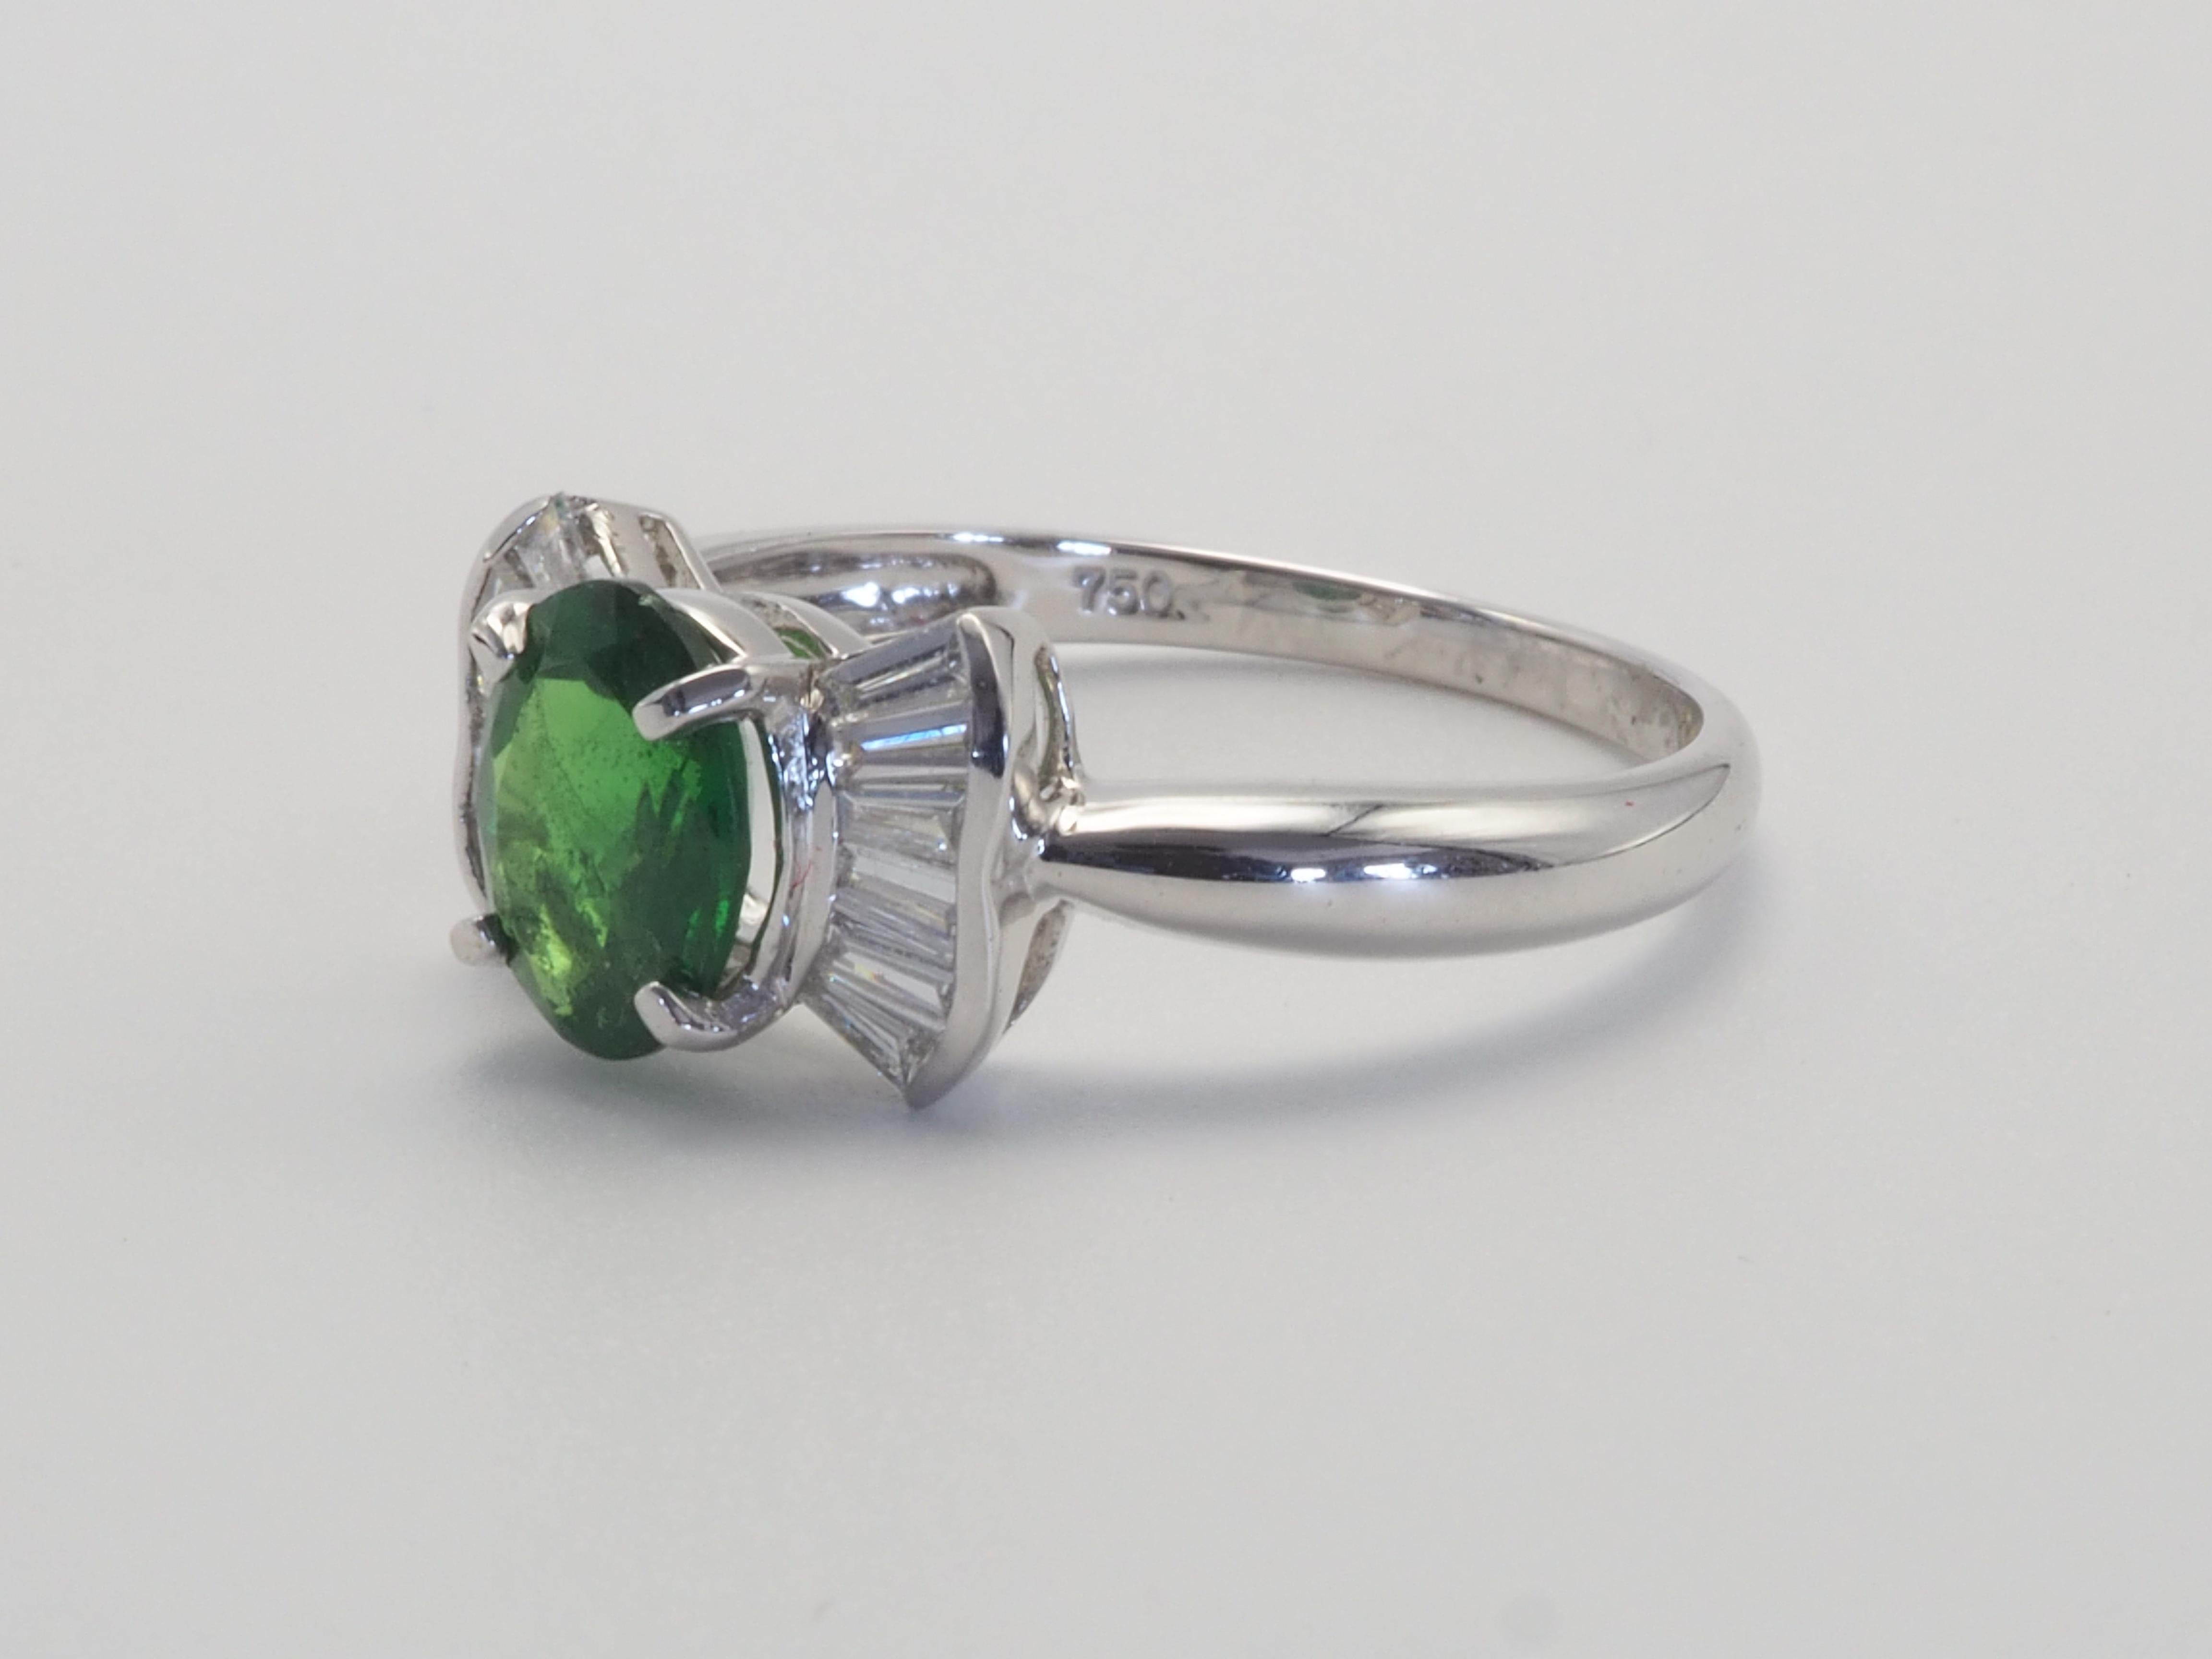 This beautiful bow tie ring is perfect for all woman, especially for those who loves refractive green stones will love the tsavorite. Those who loves green stones may often choose the famous emerald as their first choice, but a few people may also